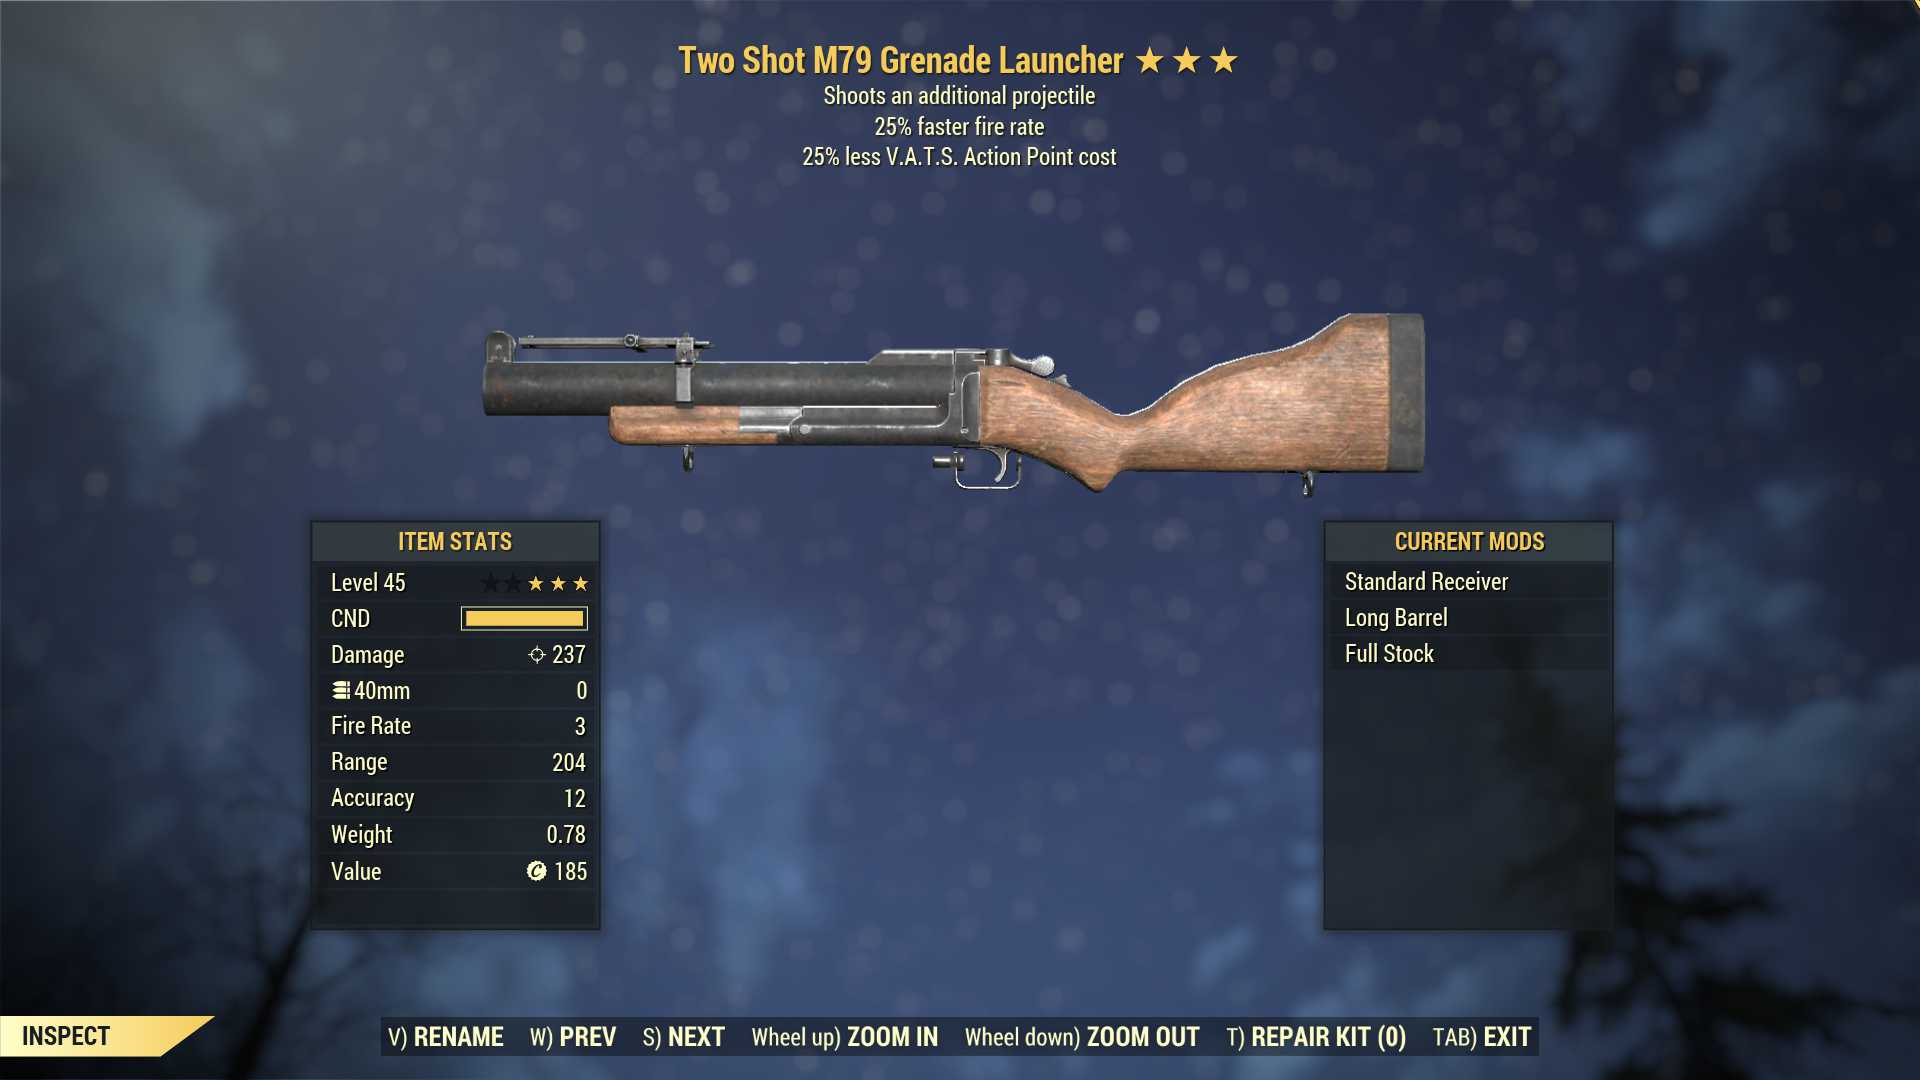 Two Shot M79 Grenade Launcher (25% faster fire rate, 25% less VATS AP cost)